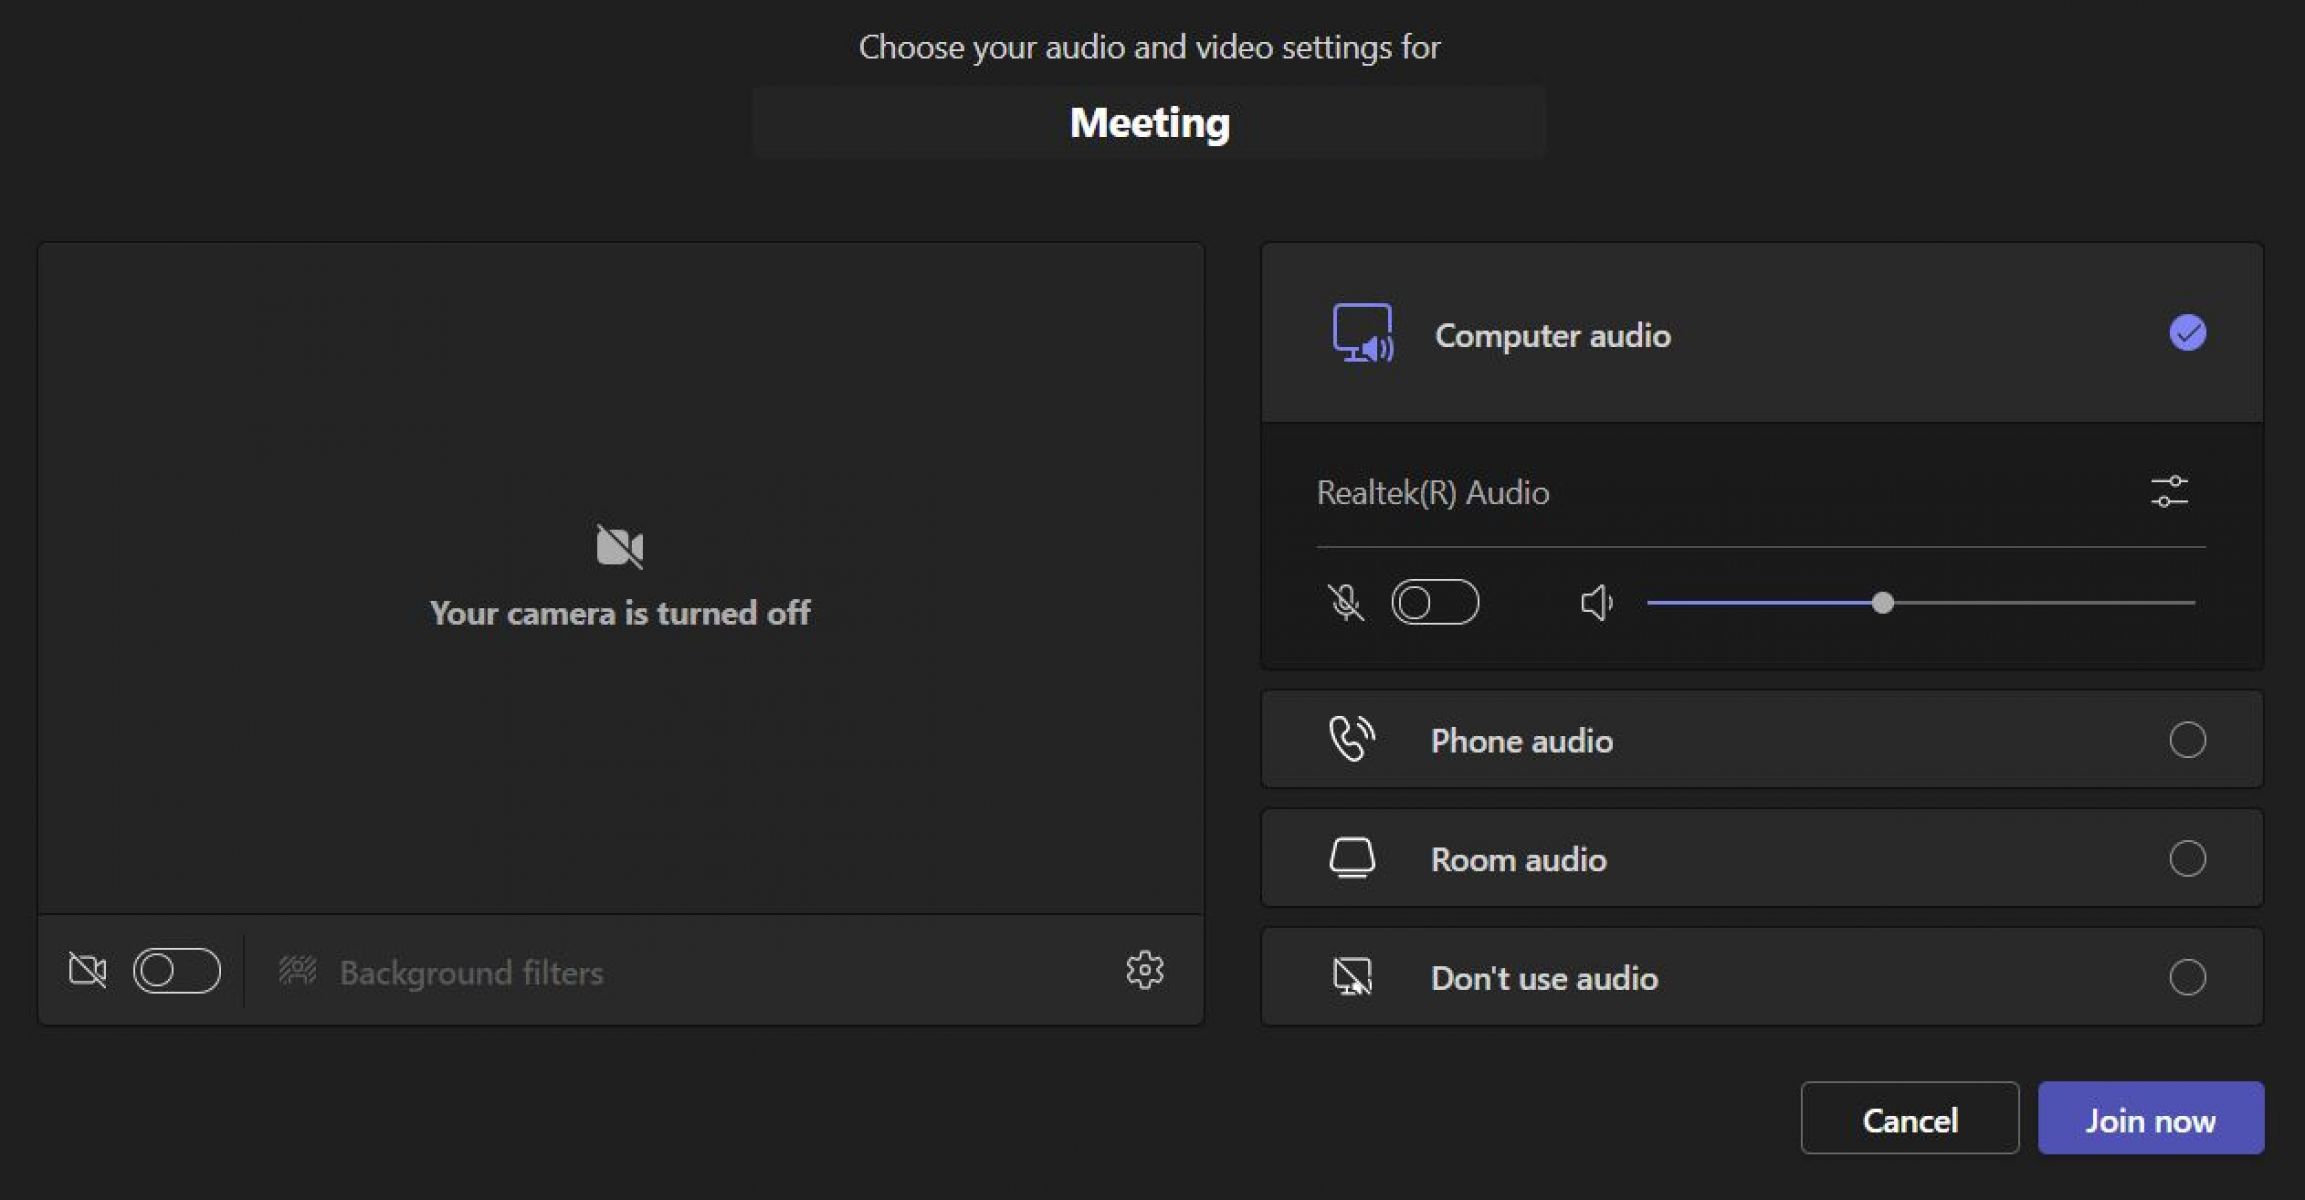 MS Teams 'join meeting' screenshot depicting a man joining a meeting in progress